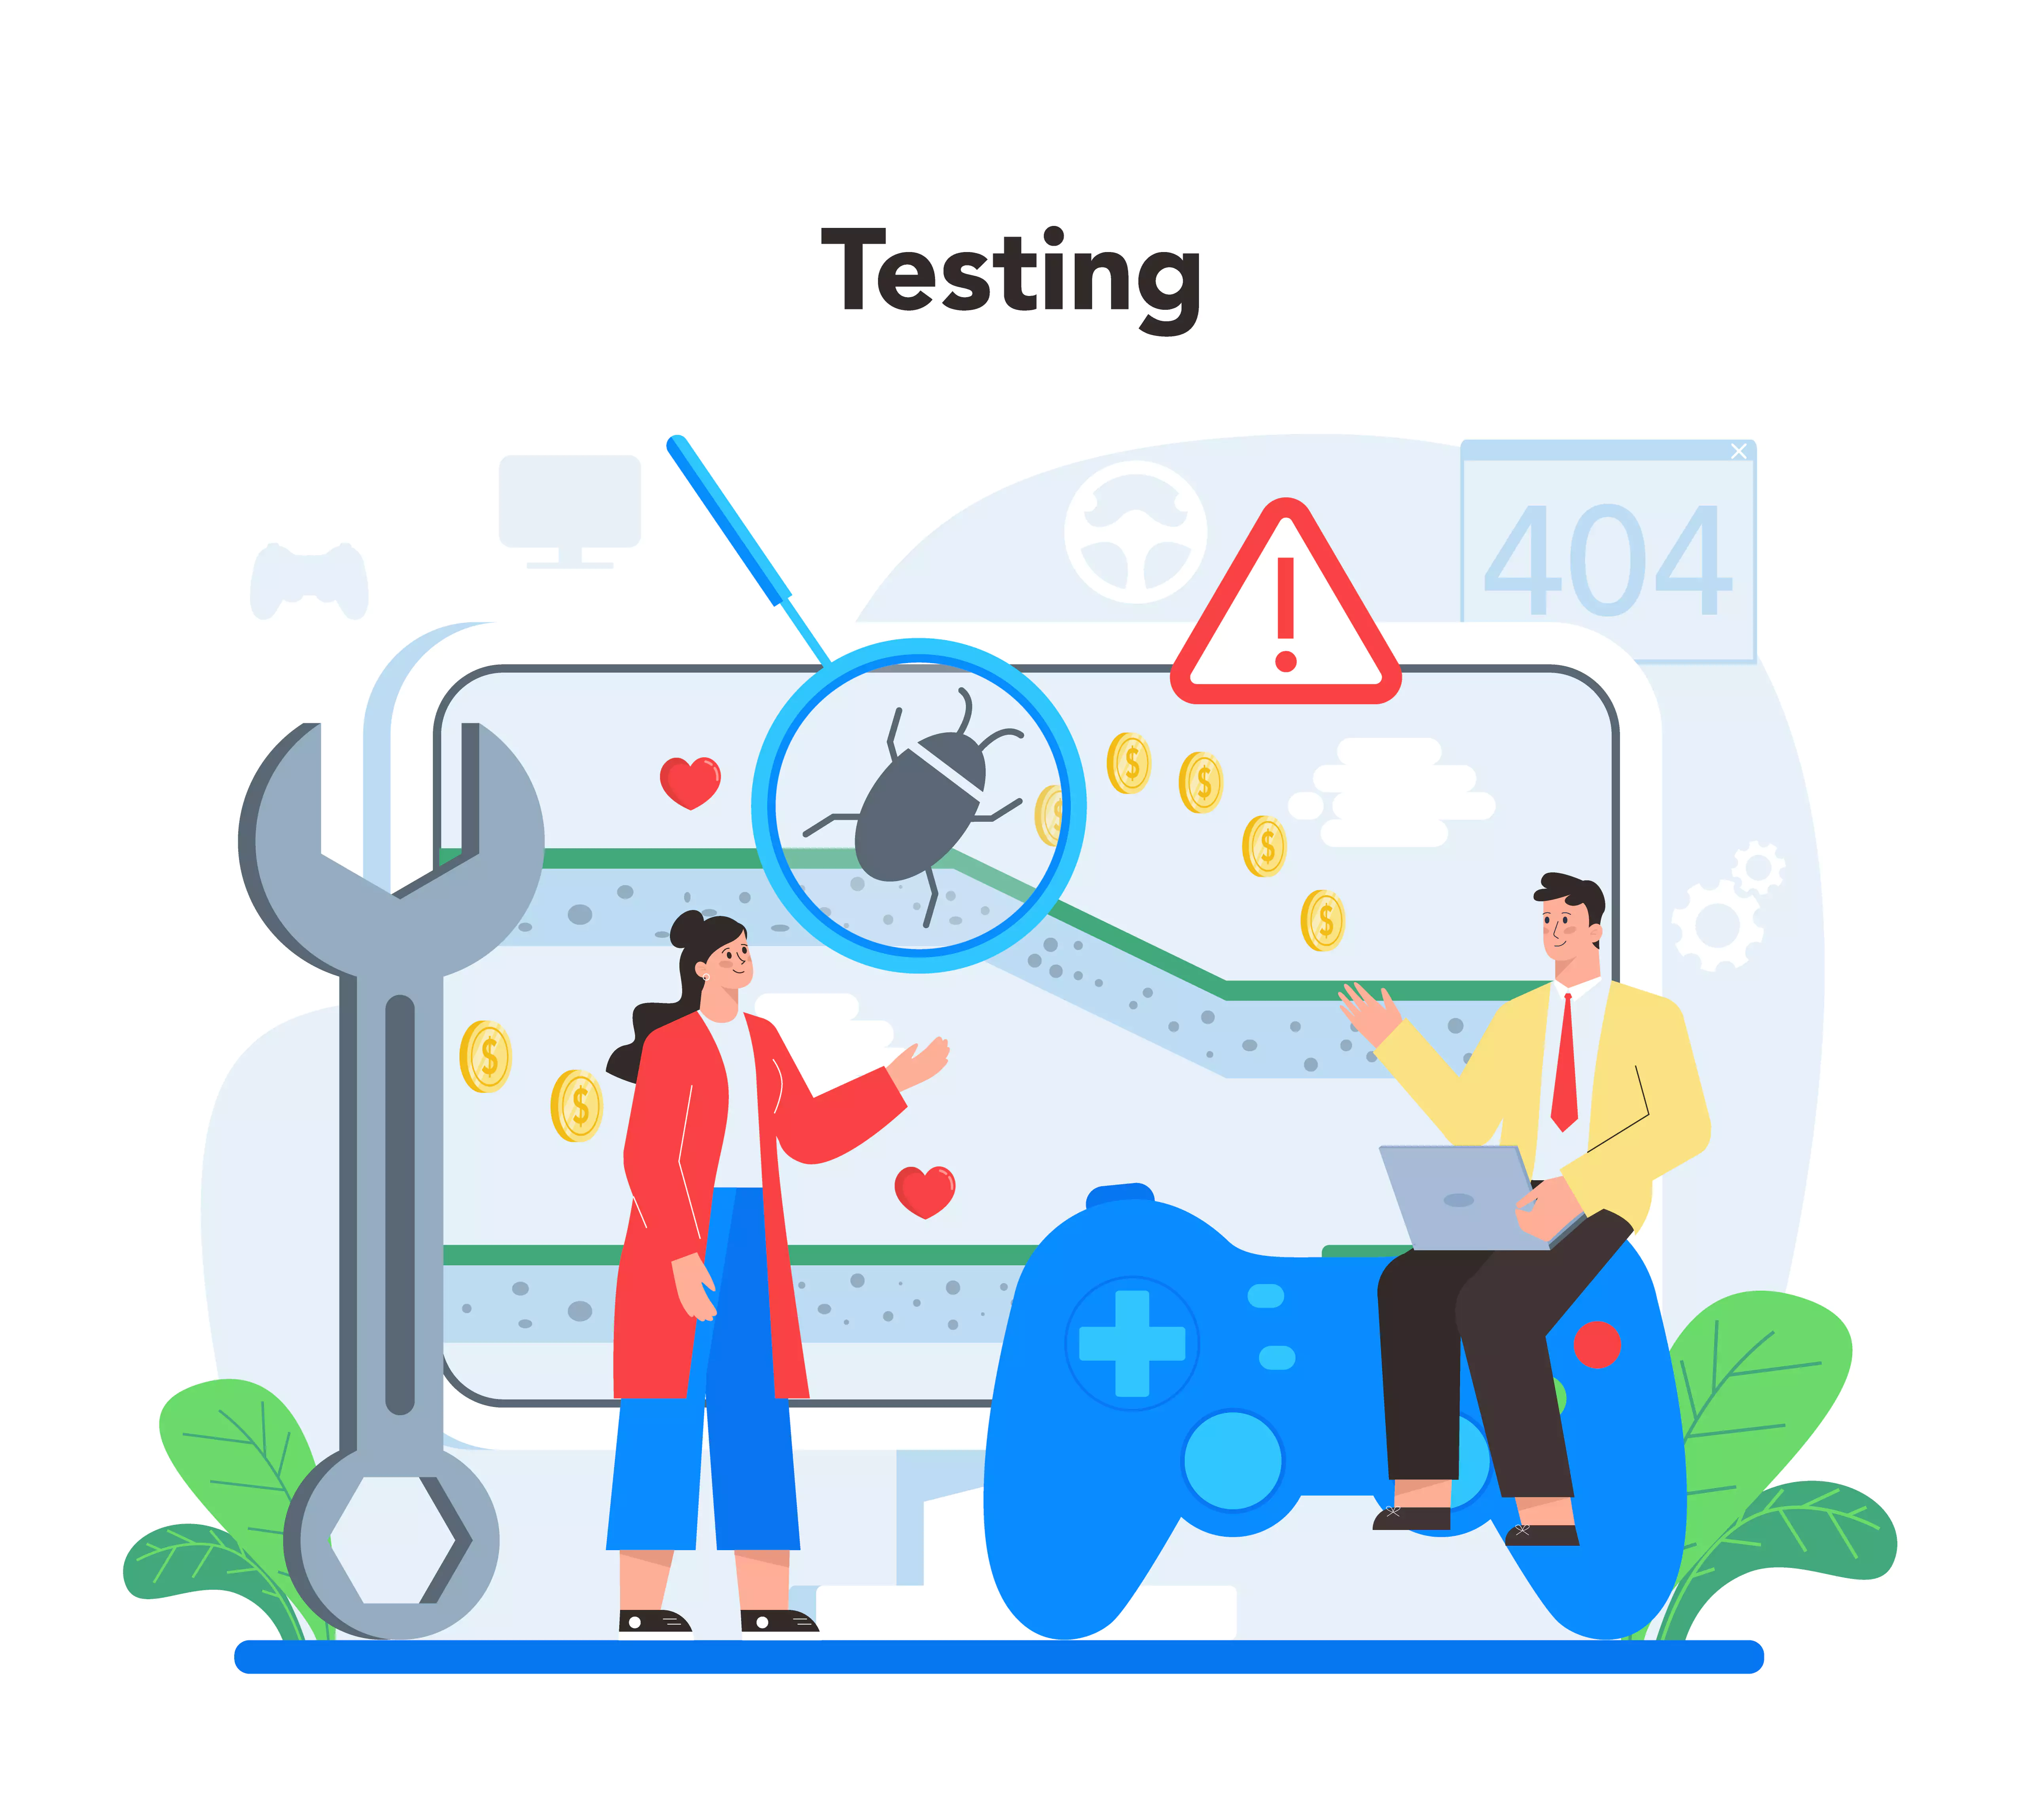 What are End-to-End Testing Tools?